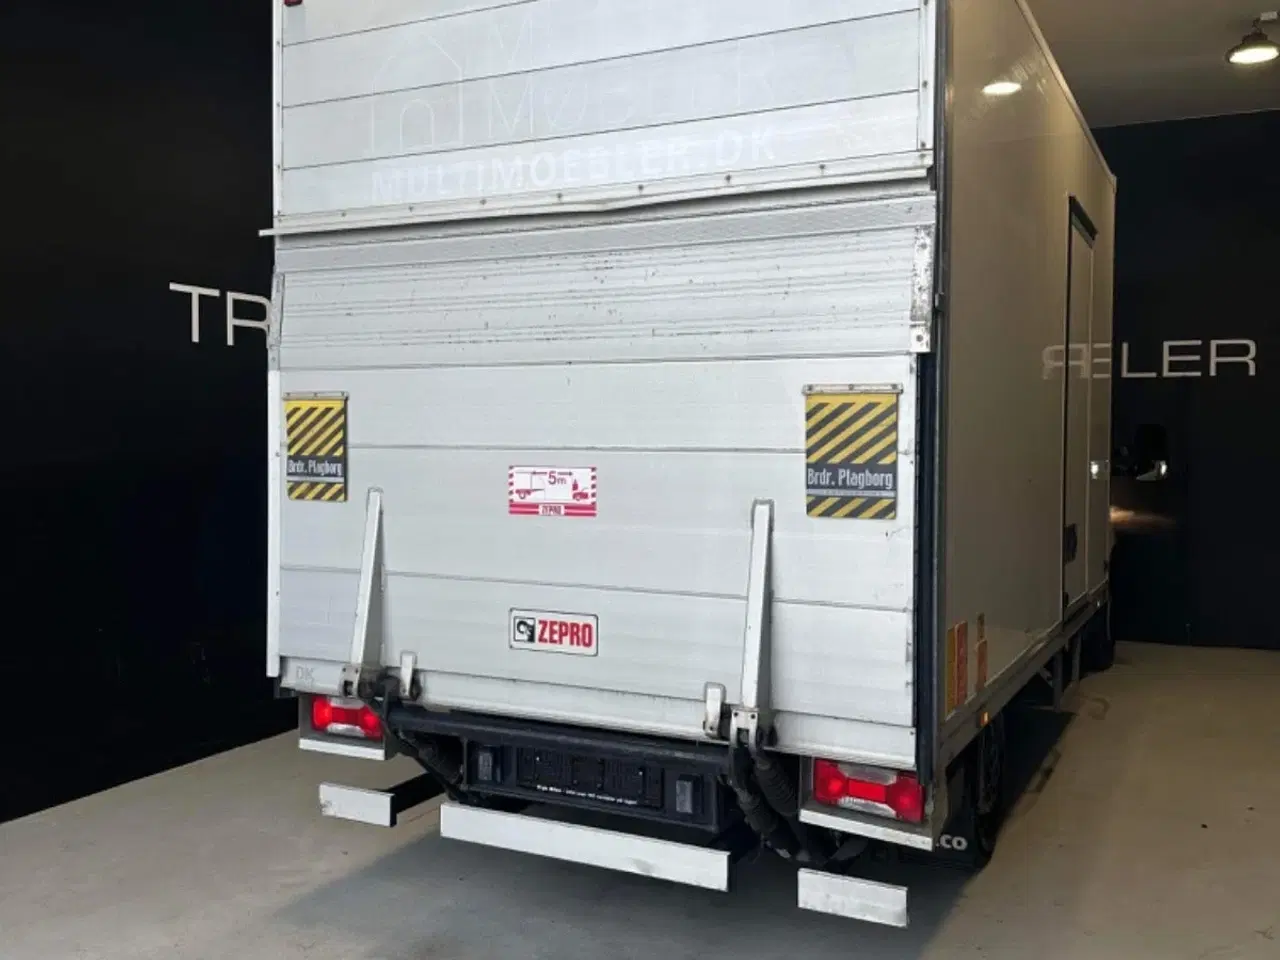 Billede 3 - Iveco Daily 2,3 35S16 Alukasse m/lift AG8